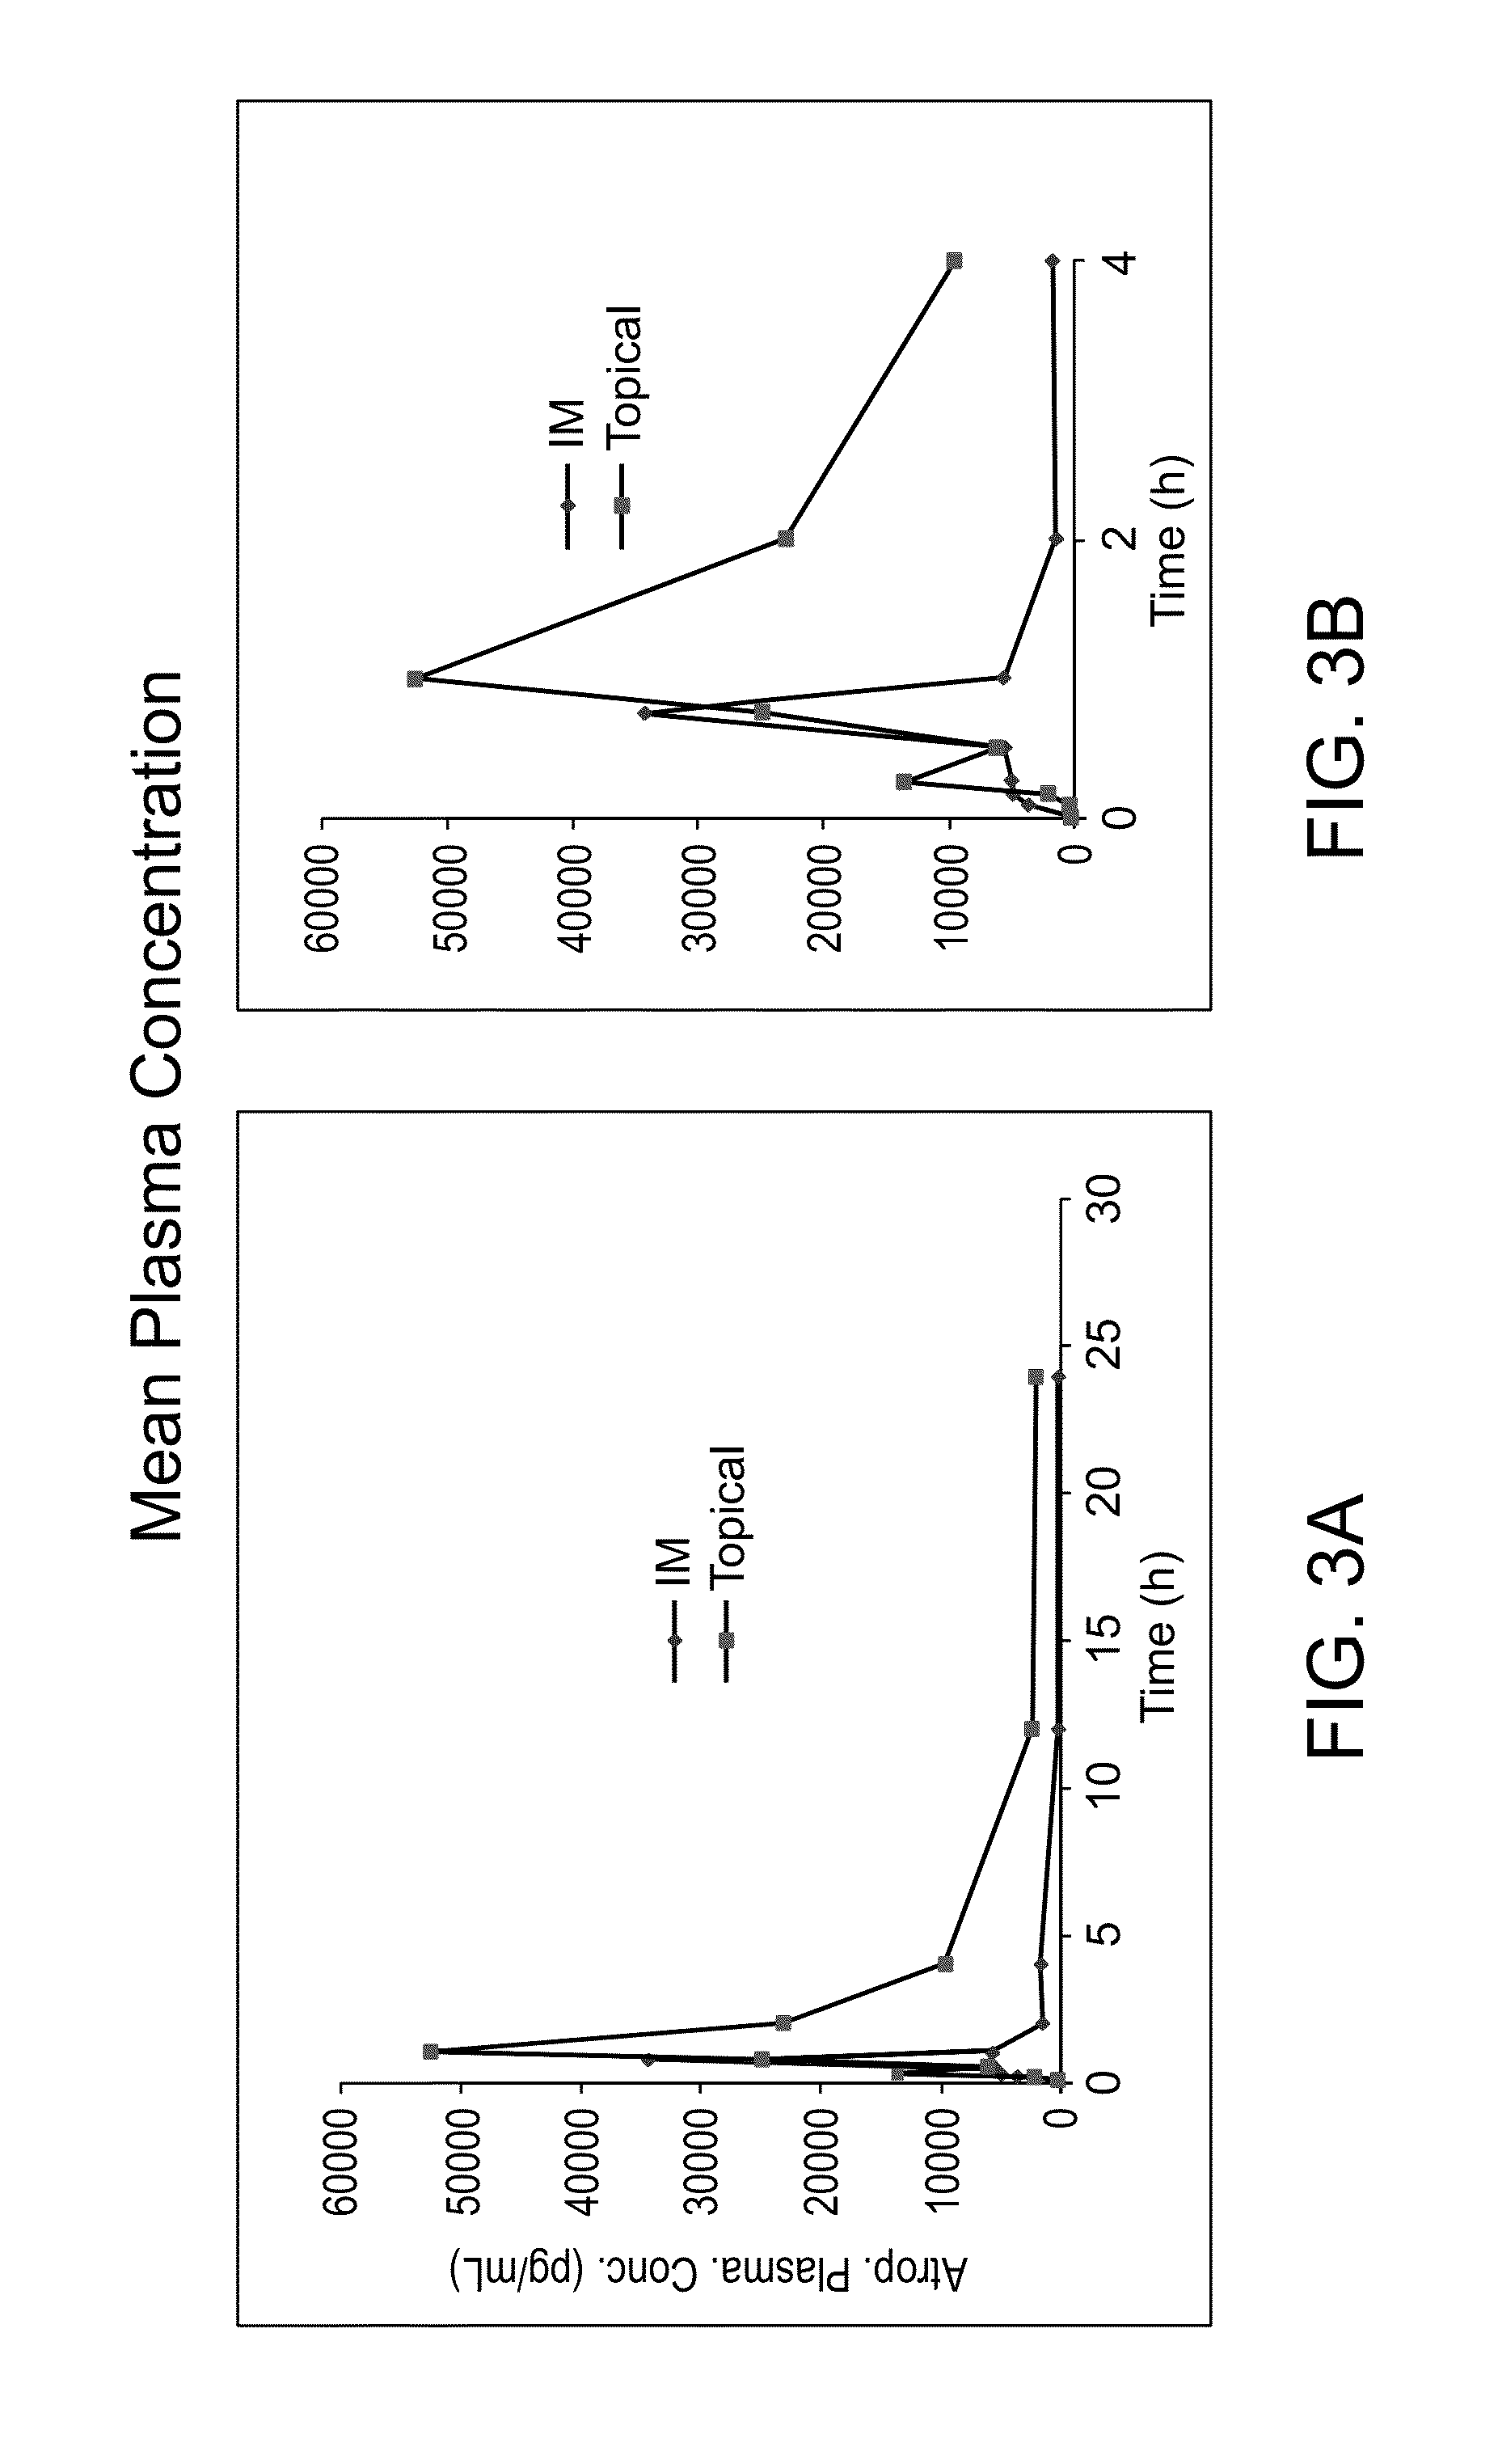 Pharmaceutical compositions and delivery devices comprising stinging cells or capsules